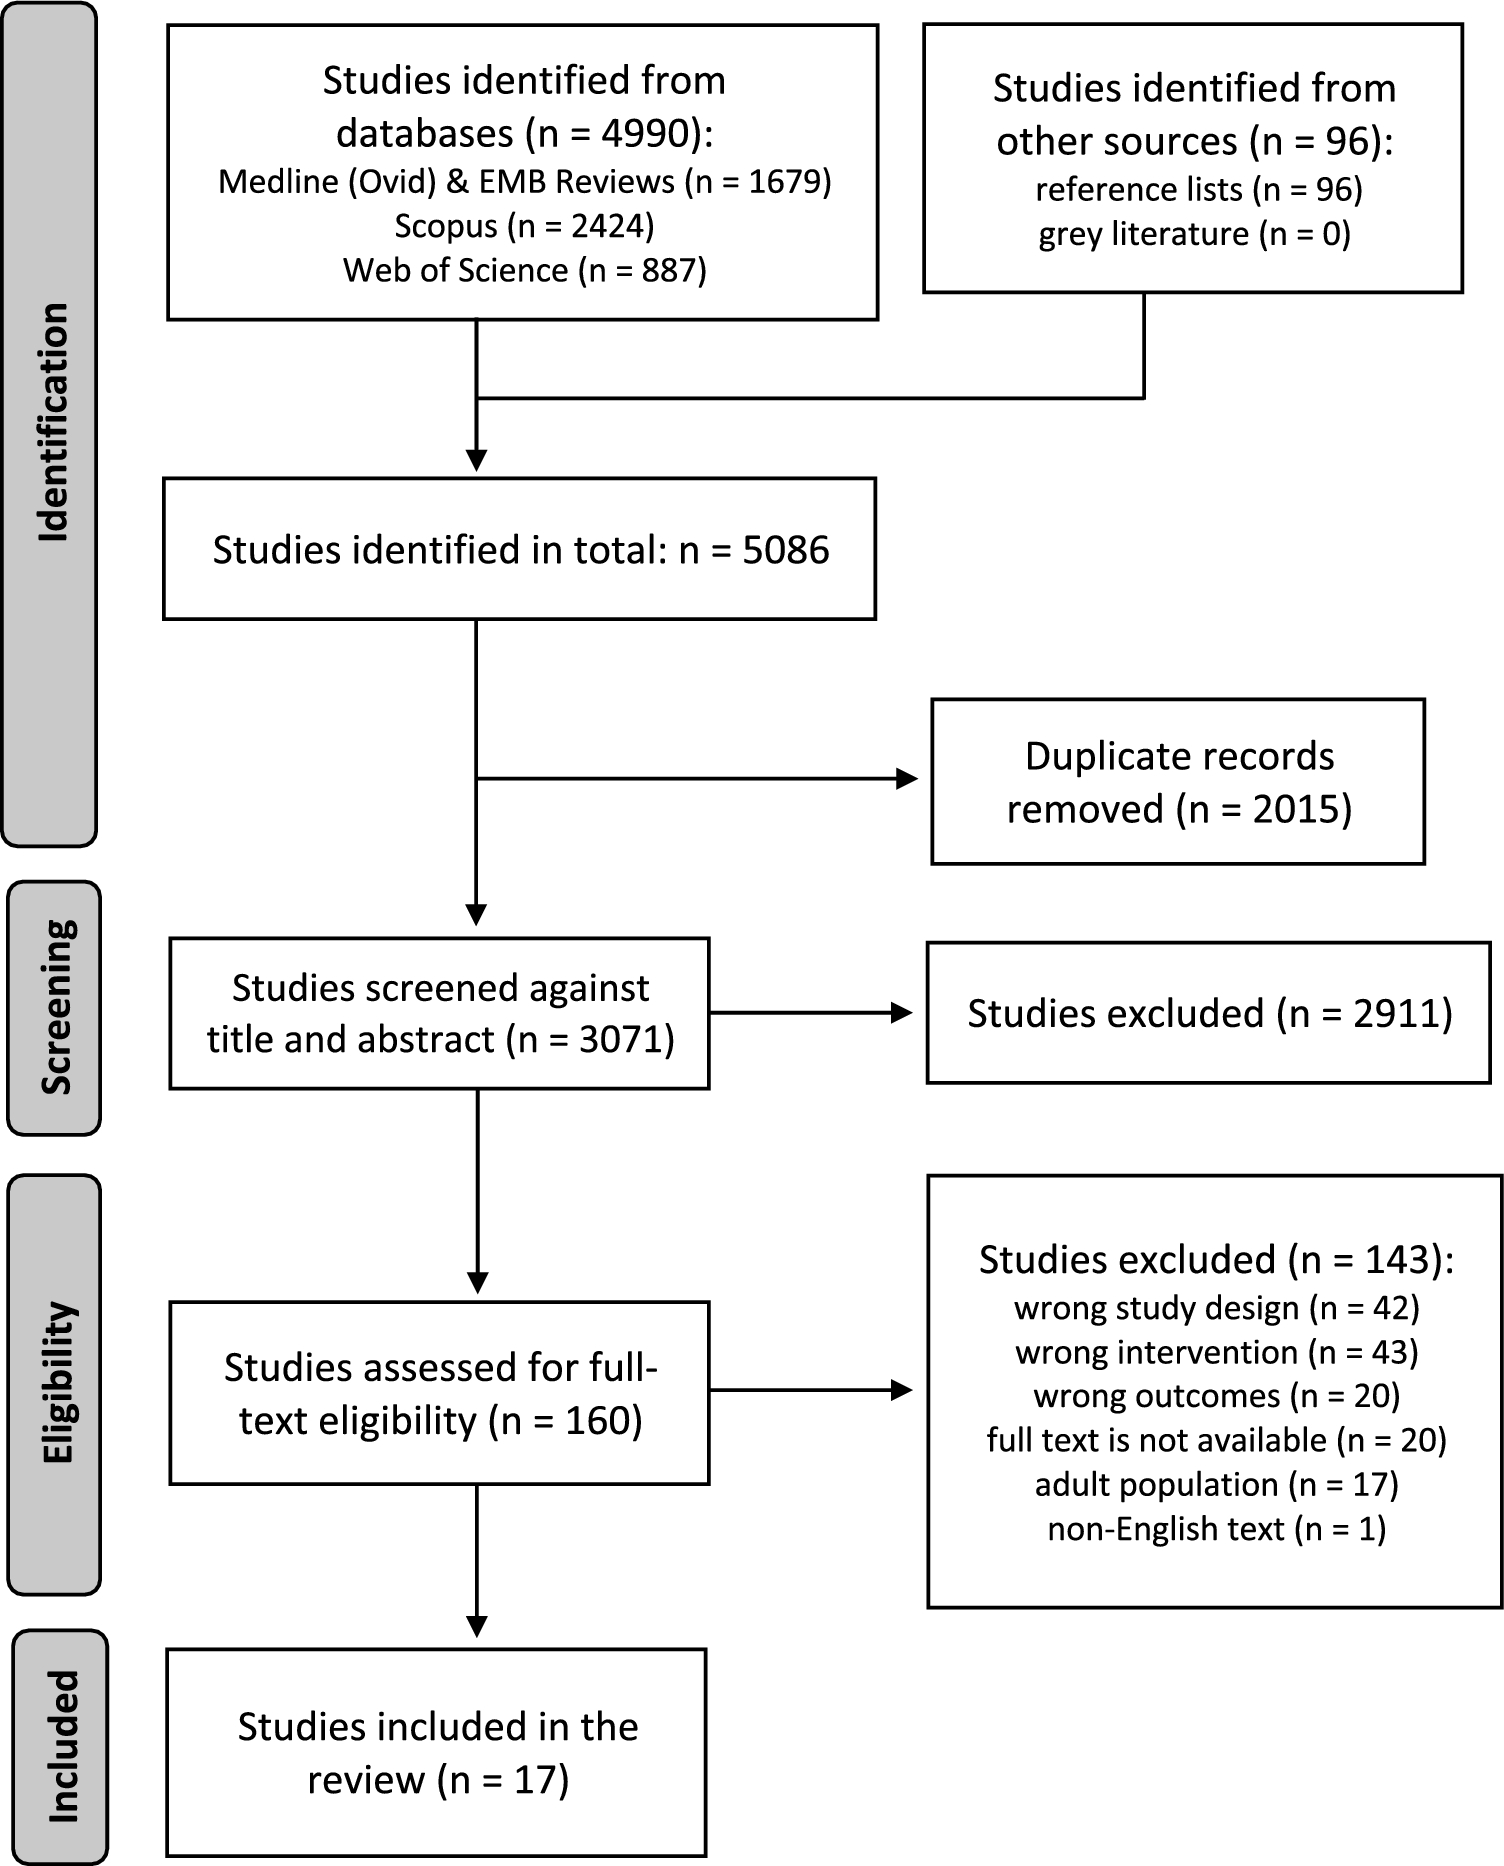 Use of Computerized Physician Order Entry with Clinical Decision Support to Prevent Dose Errors in Pediatric Medication Orders: A Systematic Review